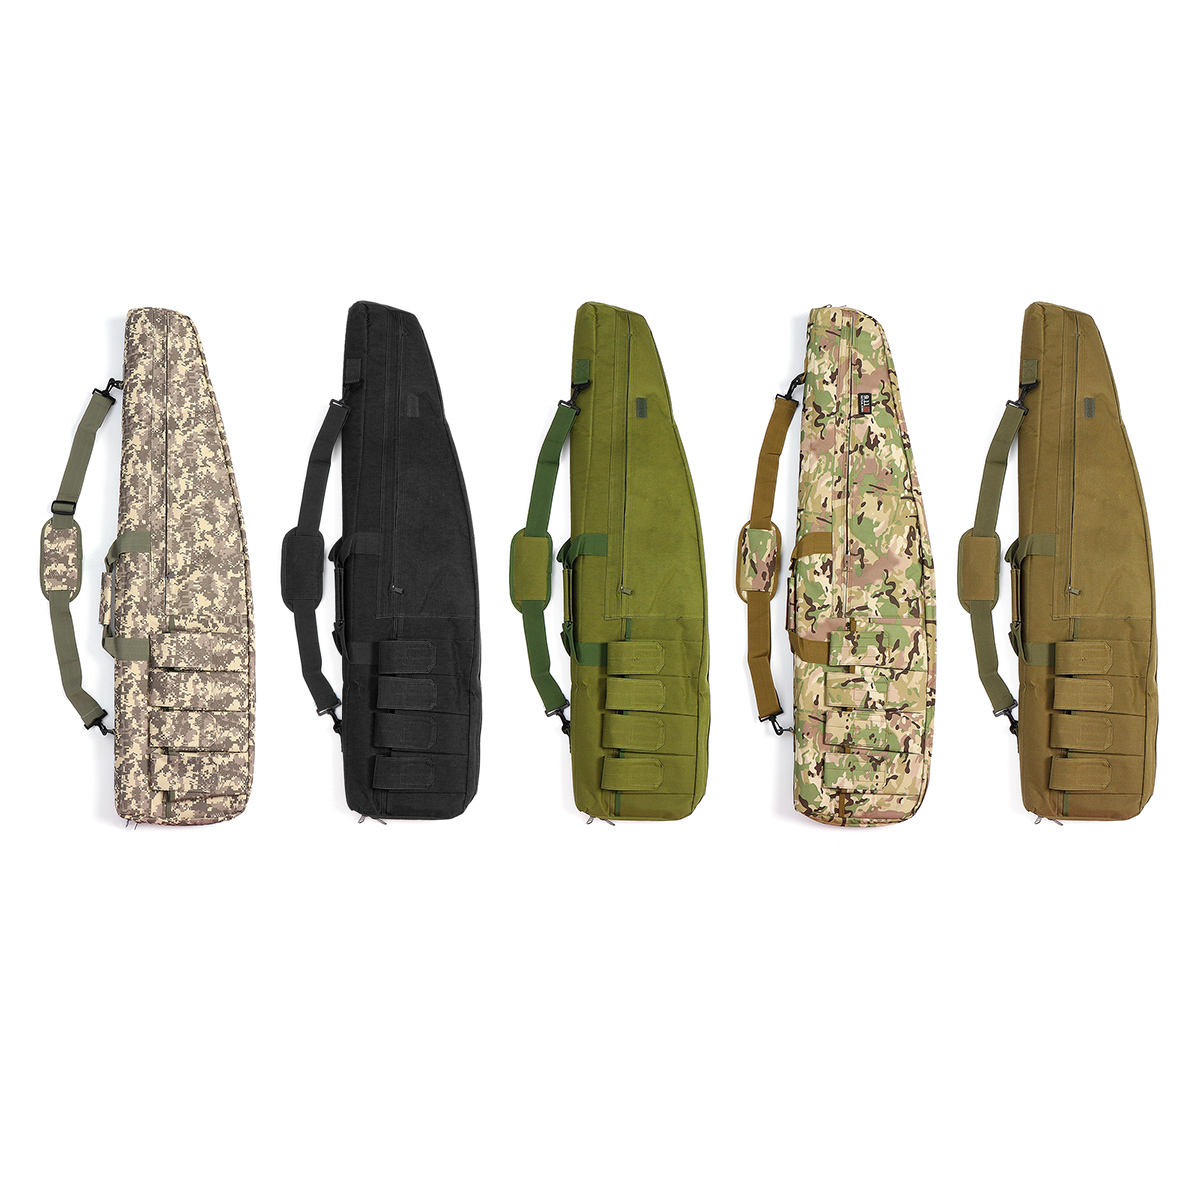 100x25x5cm-Outdoor-Hunting-Tactical-Bag-CS-Airsoft-Case-Tactical-Package-Heavy-Duty-Hunting-Accessor-1519991-4